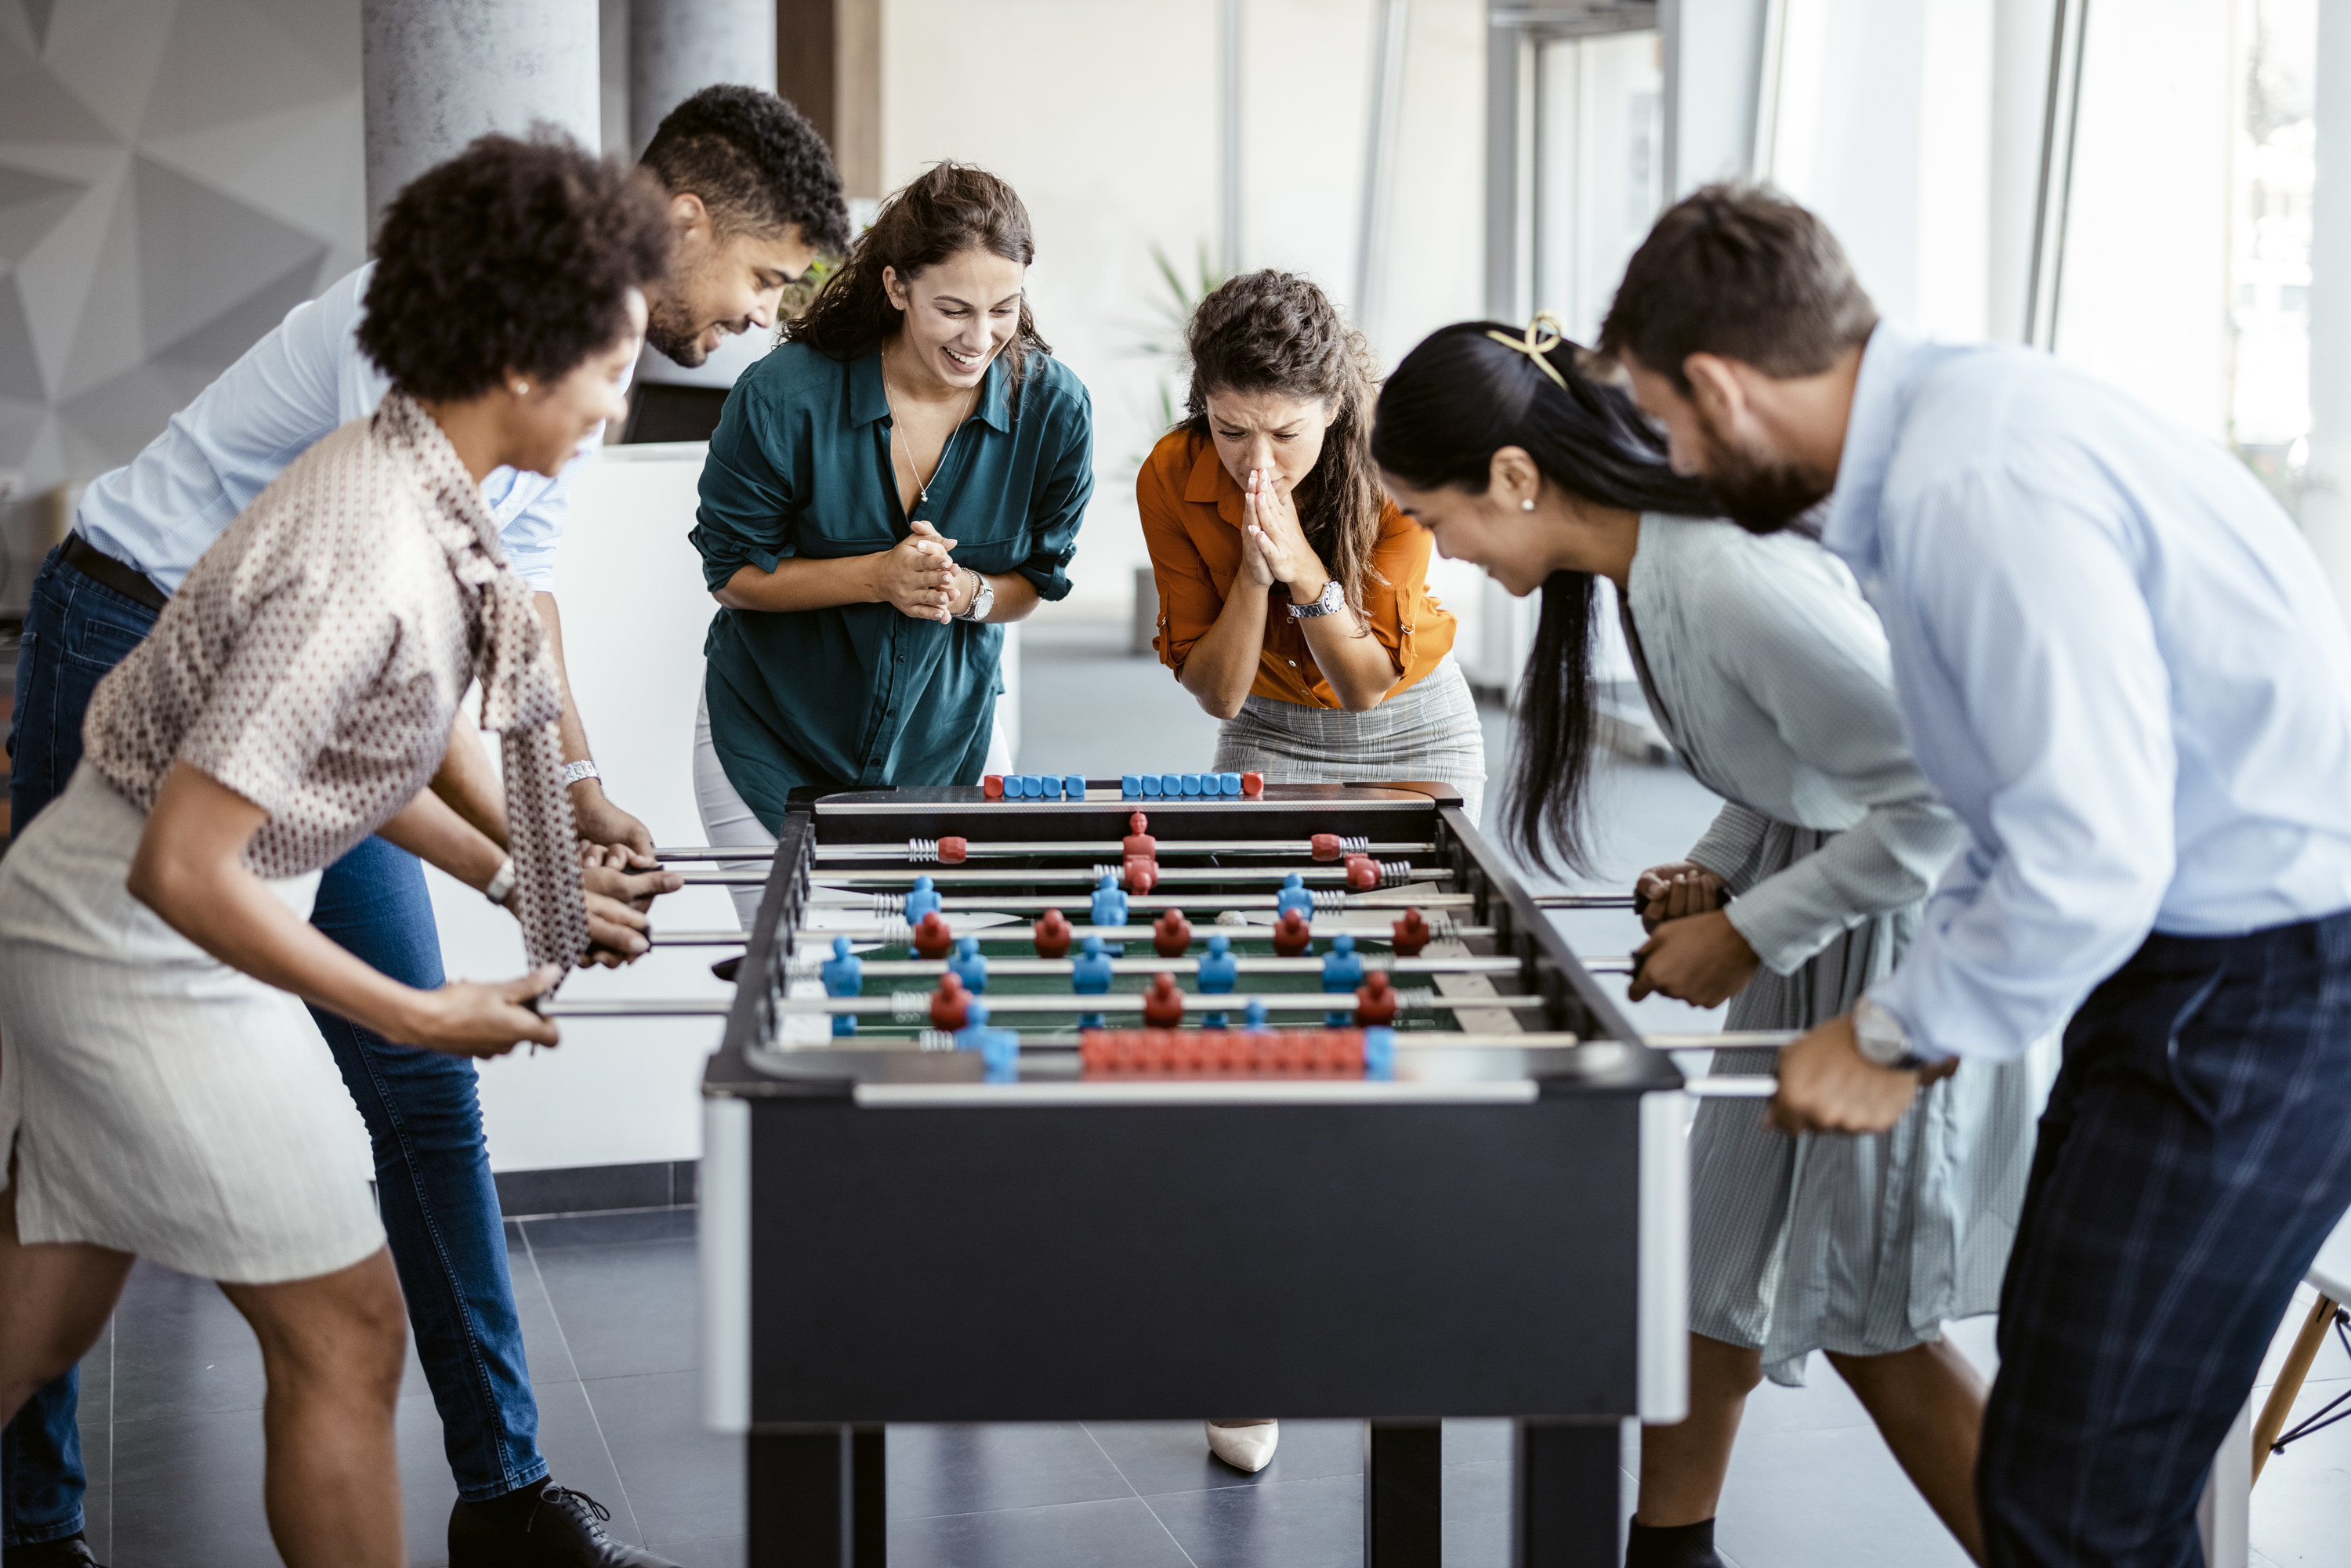 Employees crowded around a foosball table